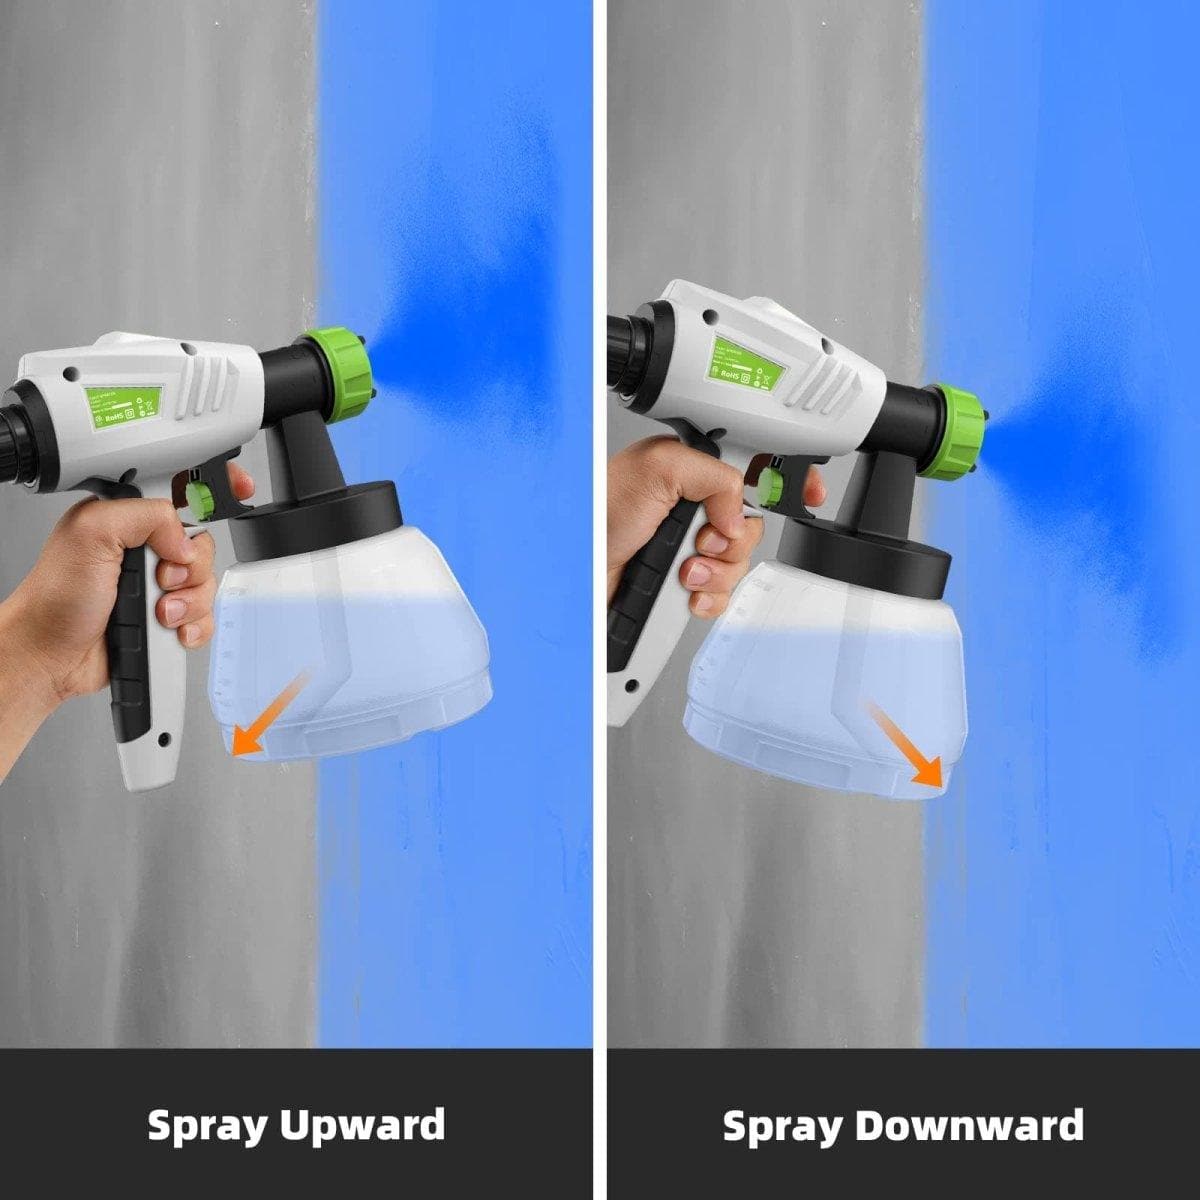 Huepar Tools SG800 HVLP electric paint sprayer with 4 metal nozzles and 3 patterns, ideal for home interior and exterior walls, house painting, ceiling, fence, cabinet, chair8